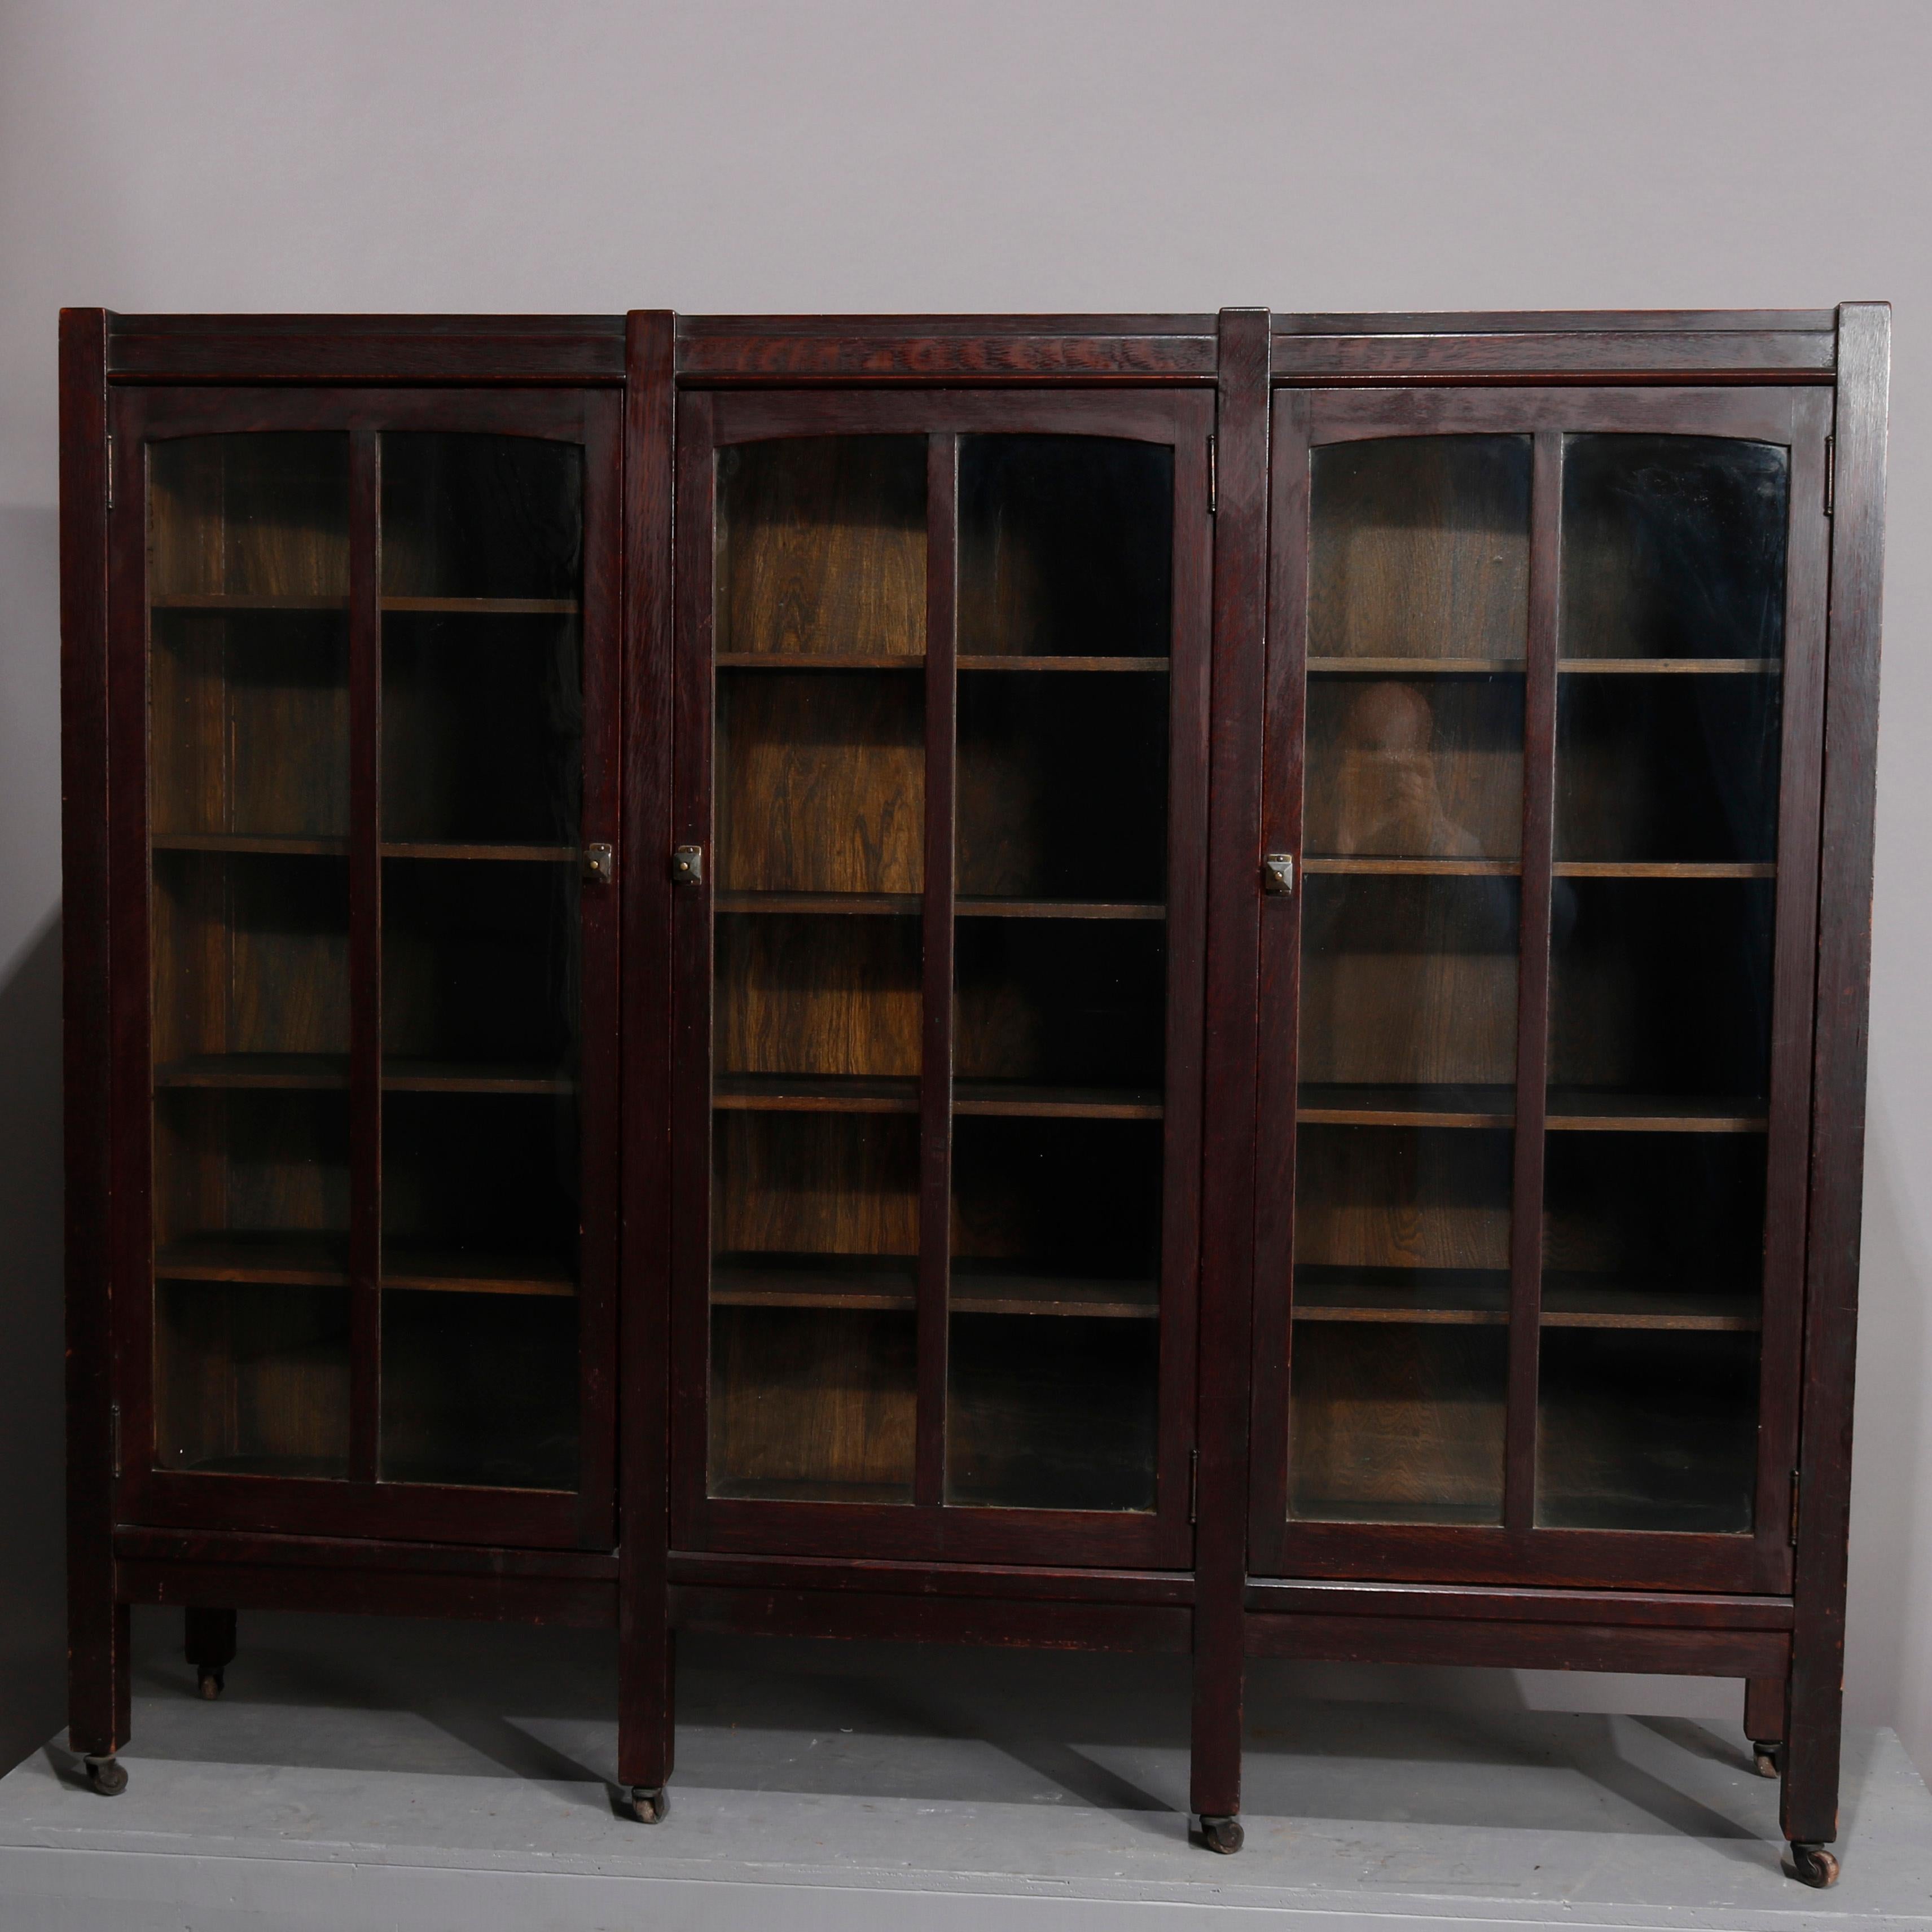 An antique Stickley School Arts & Crafts mission oak bookcase offers quarter sawn oak construction with three glass doors having arched frames and opening to shelved interior, raised on square and straight legs with casters, circa 1910

Measures: